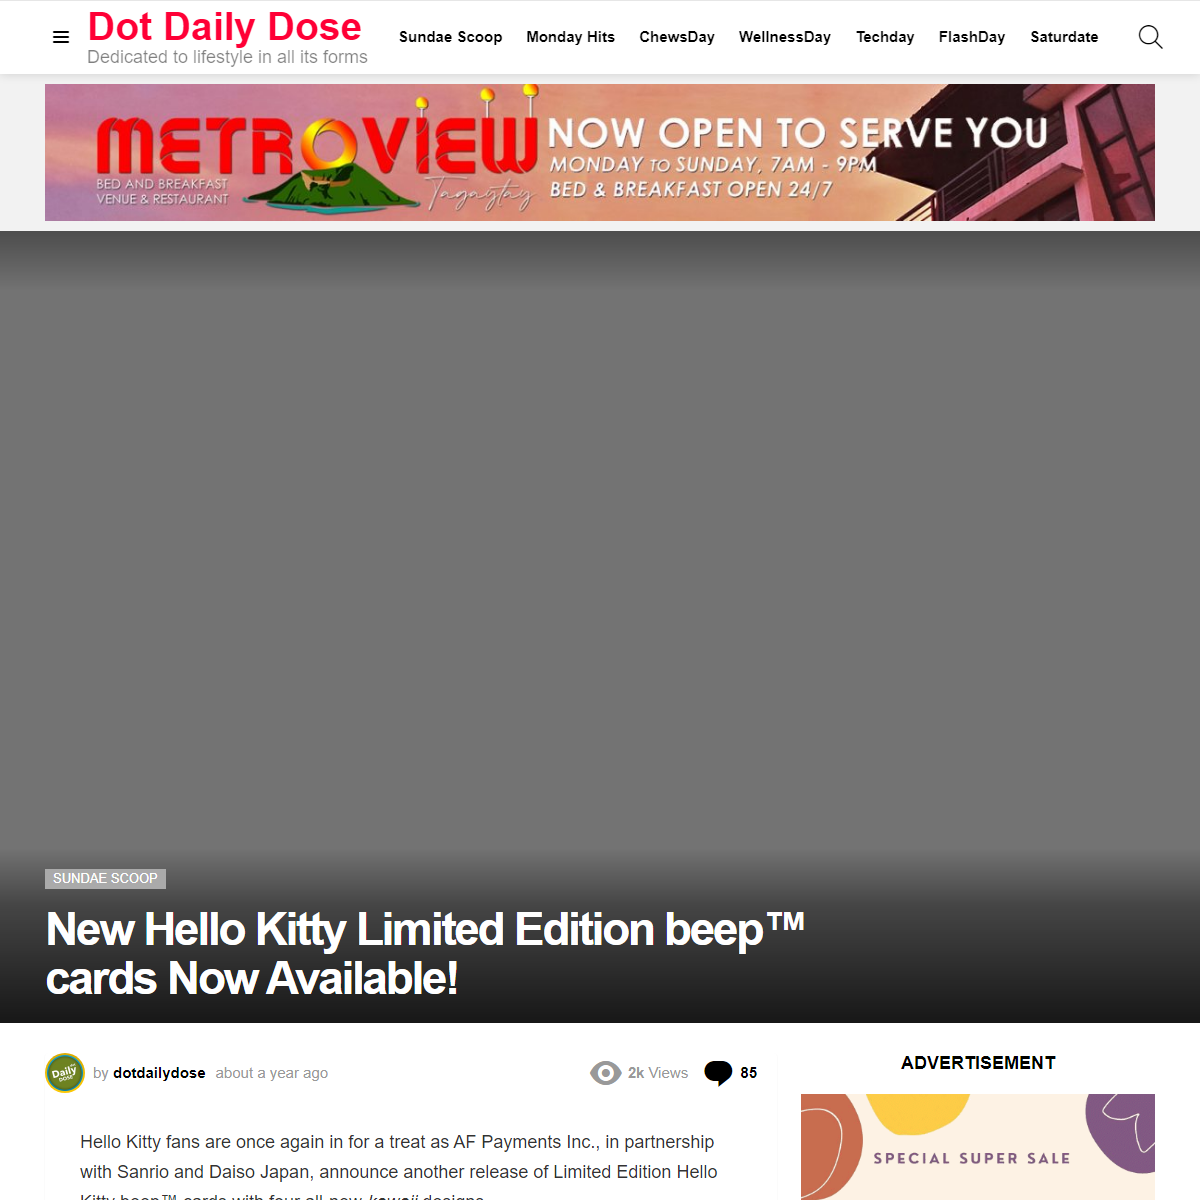 New Hello Kitty Limited Edition beepâ„¢ cards Now Available! - Dot Daily Dose